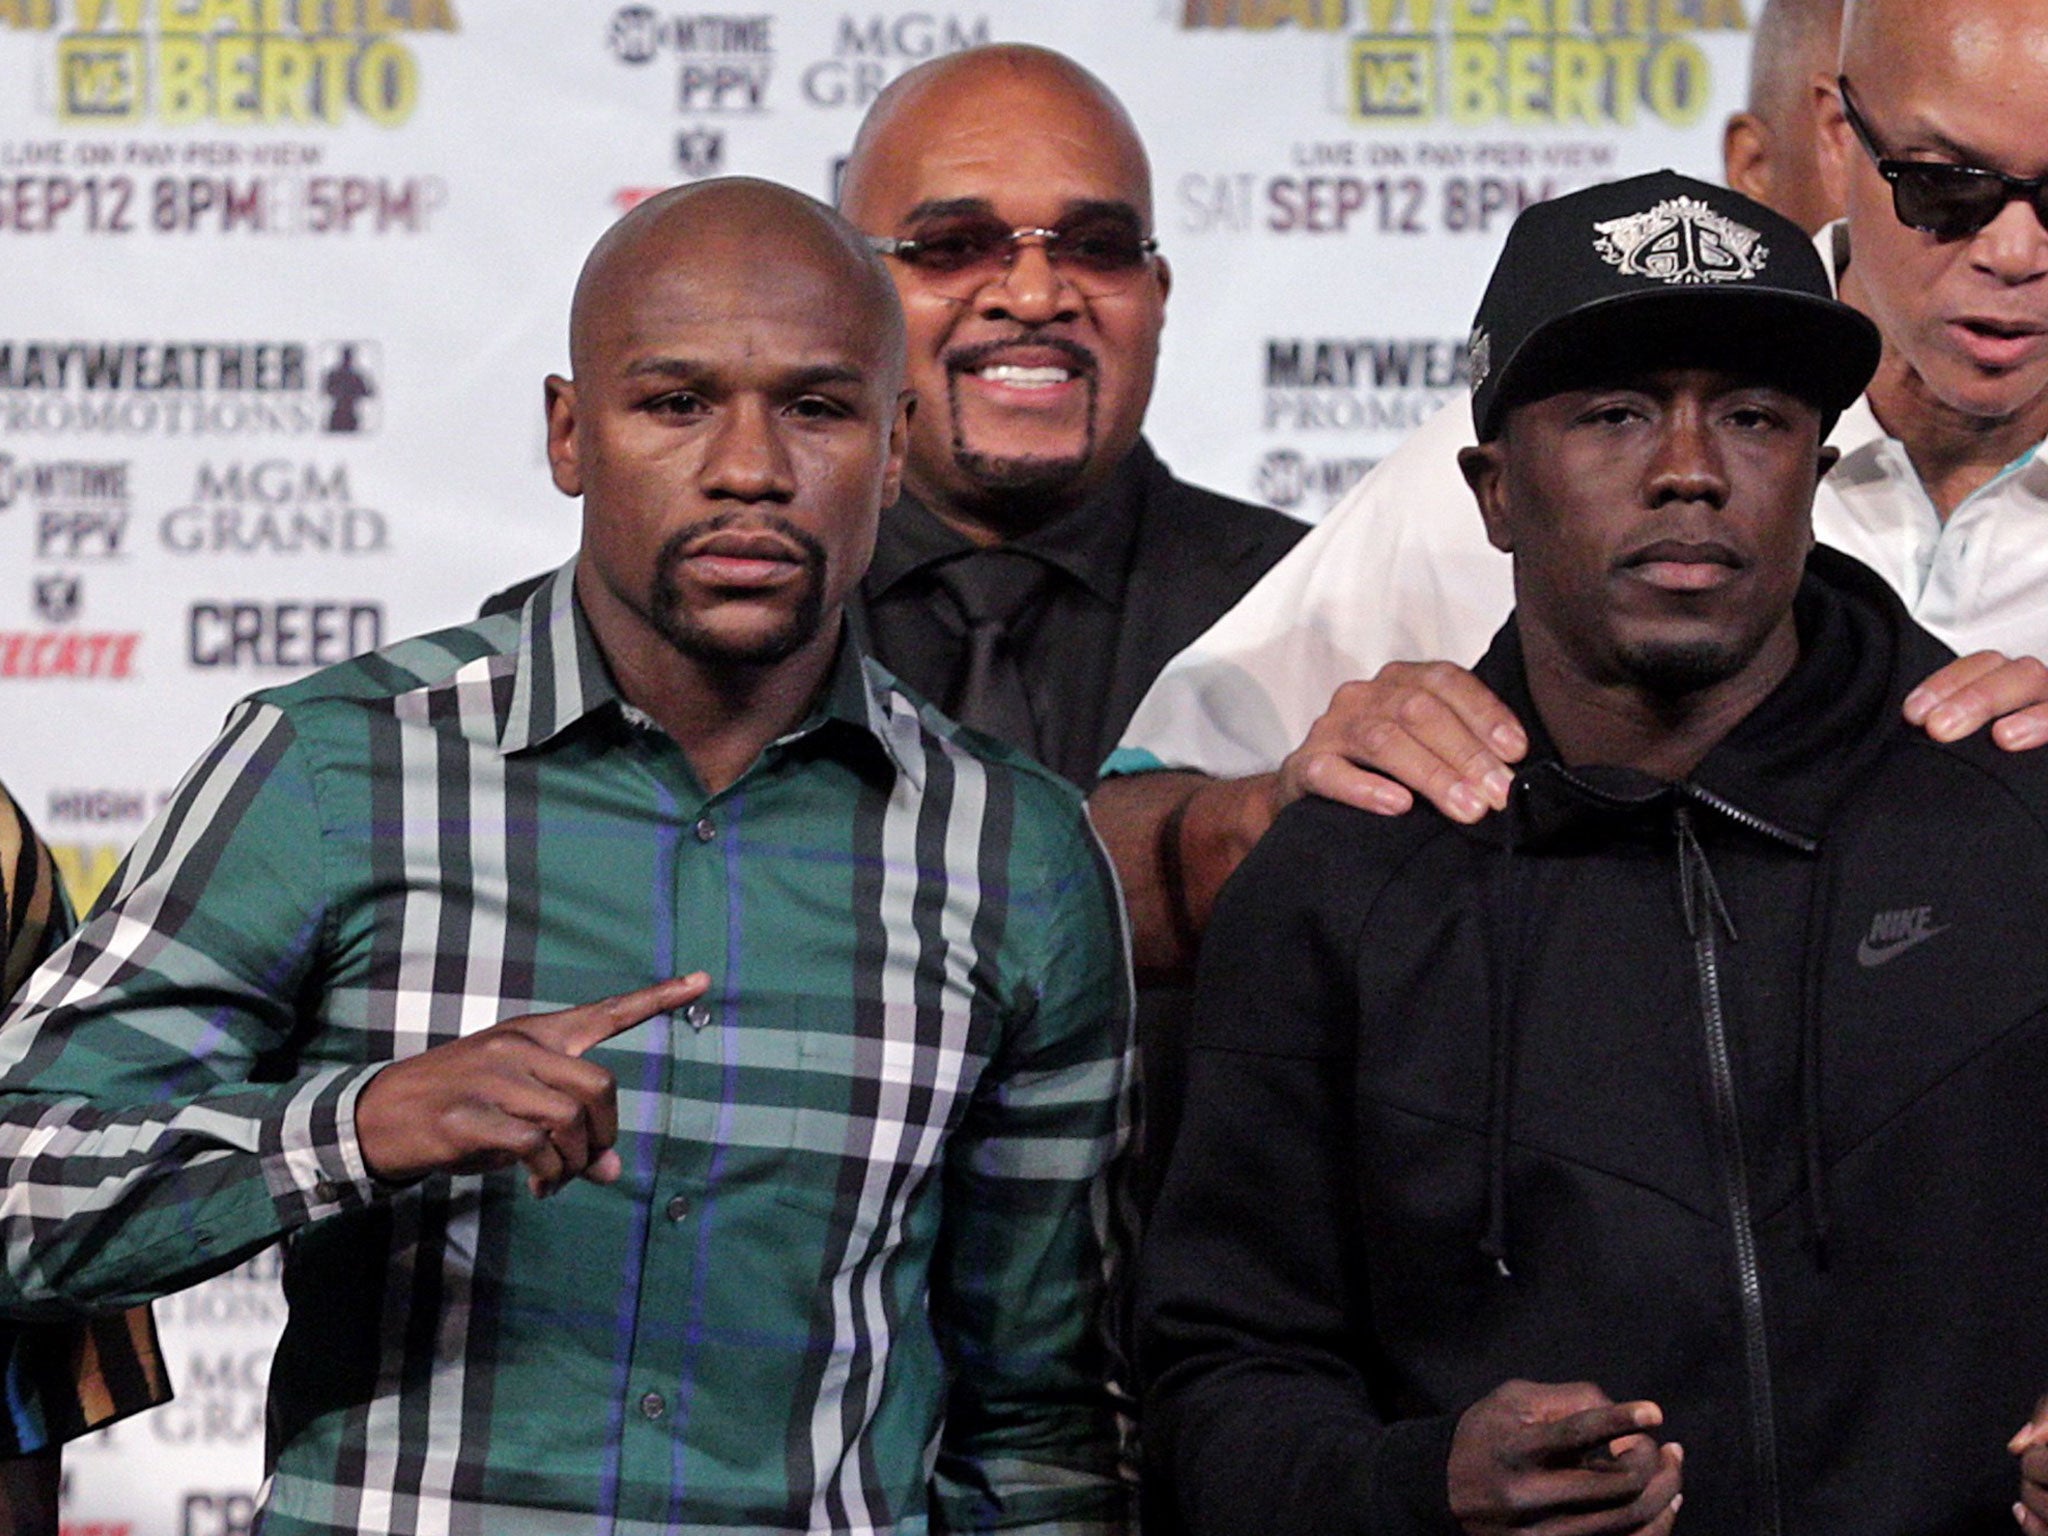 Floyd Mayweather (left) and his opponent this weekend, Andre Berto